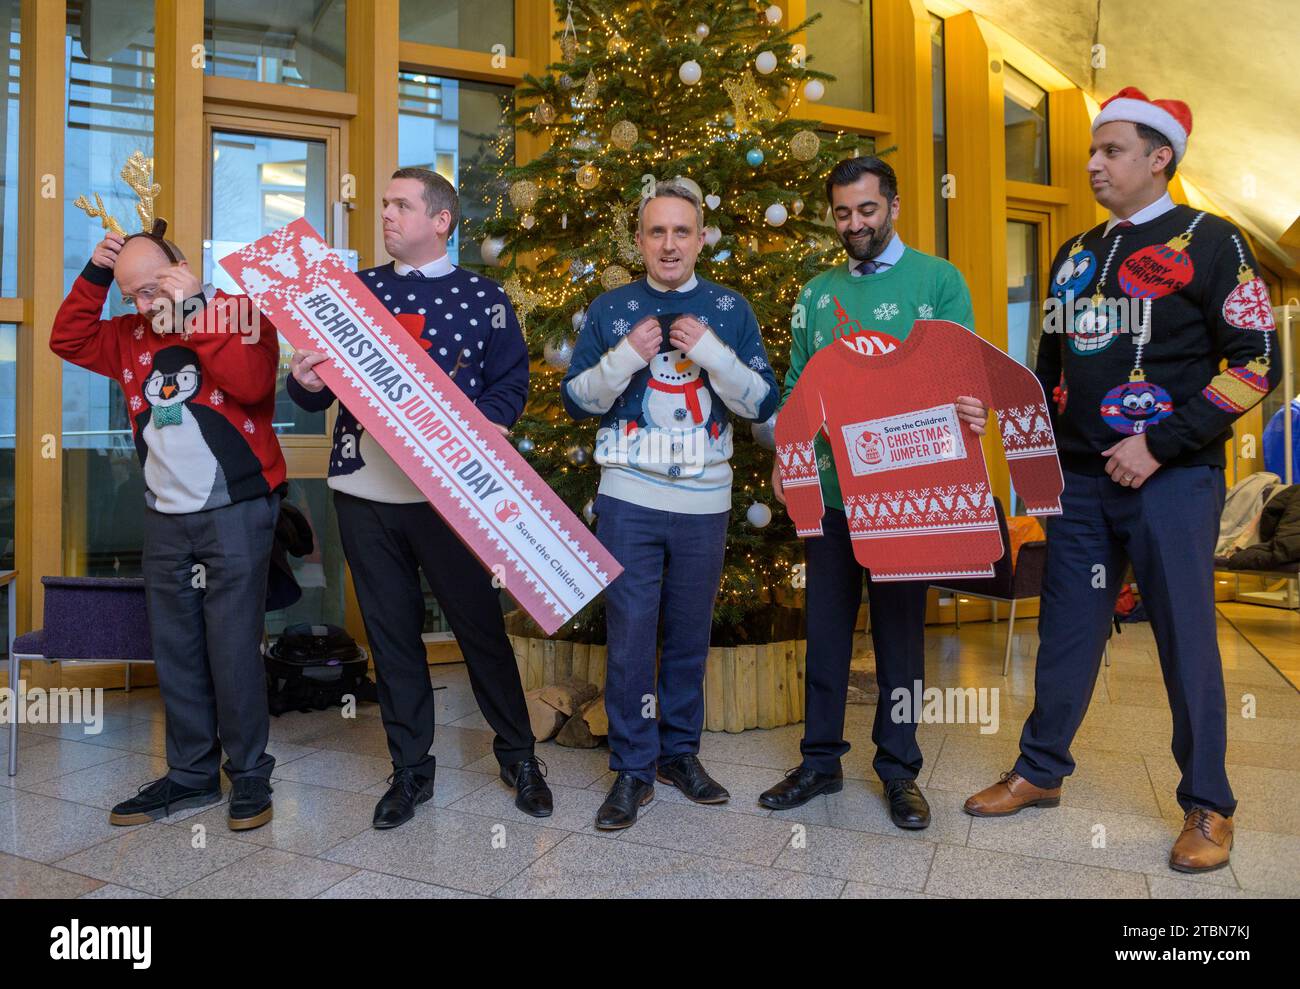 Save the Children Christmas Jumper Day. PICTURED Party leaders at The Scottish Parliament wearing Christmas jumpers in support of Save the Children.  L-R Patrick Harvie Scottish Greens, Douglas Ross Scottish Conservatives, Alex Cole-Hamilton Lib Dems, Frist Minister Humza Yousaf SNP and Anas Sarwar Scottish Labour. Stock Photo